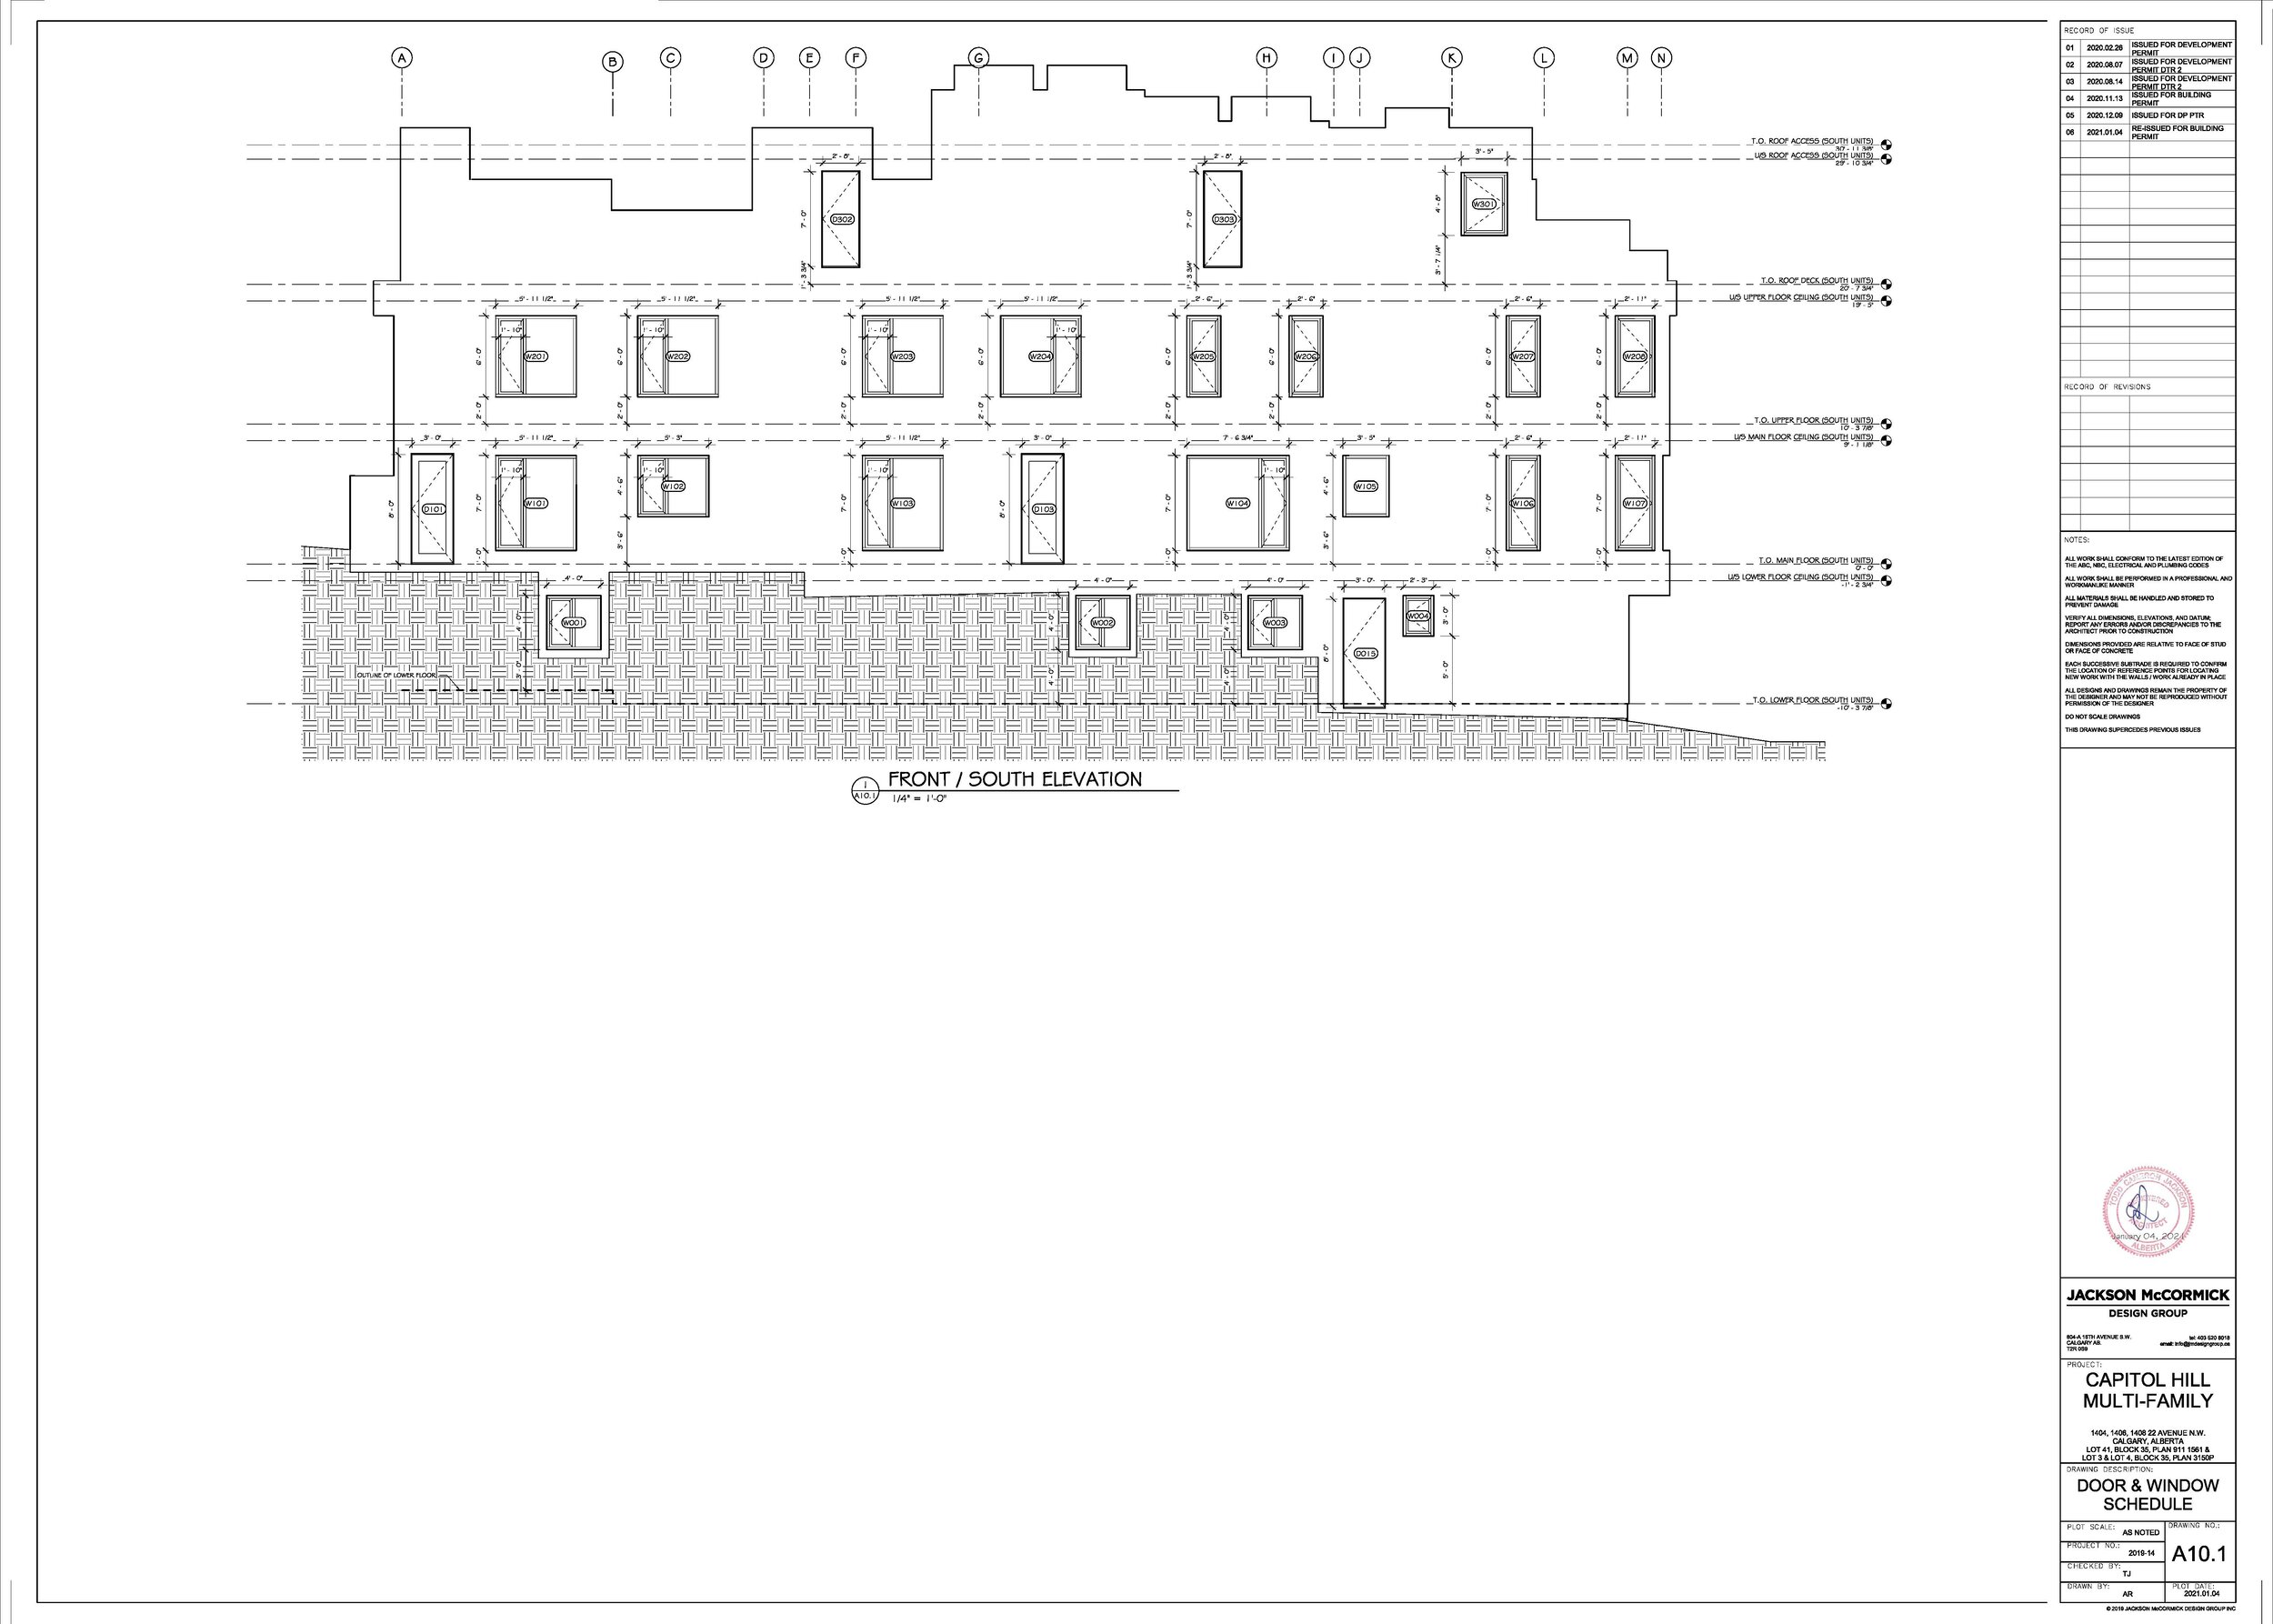 2021.01.04 - CAPITOL HILL MULTI-FAMILY - ARCH BP DRAWINGS_Page_26.jpg